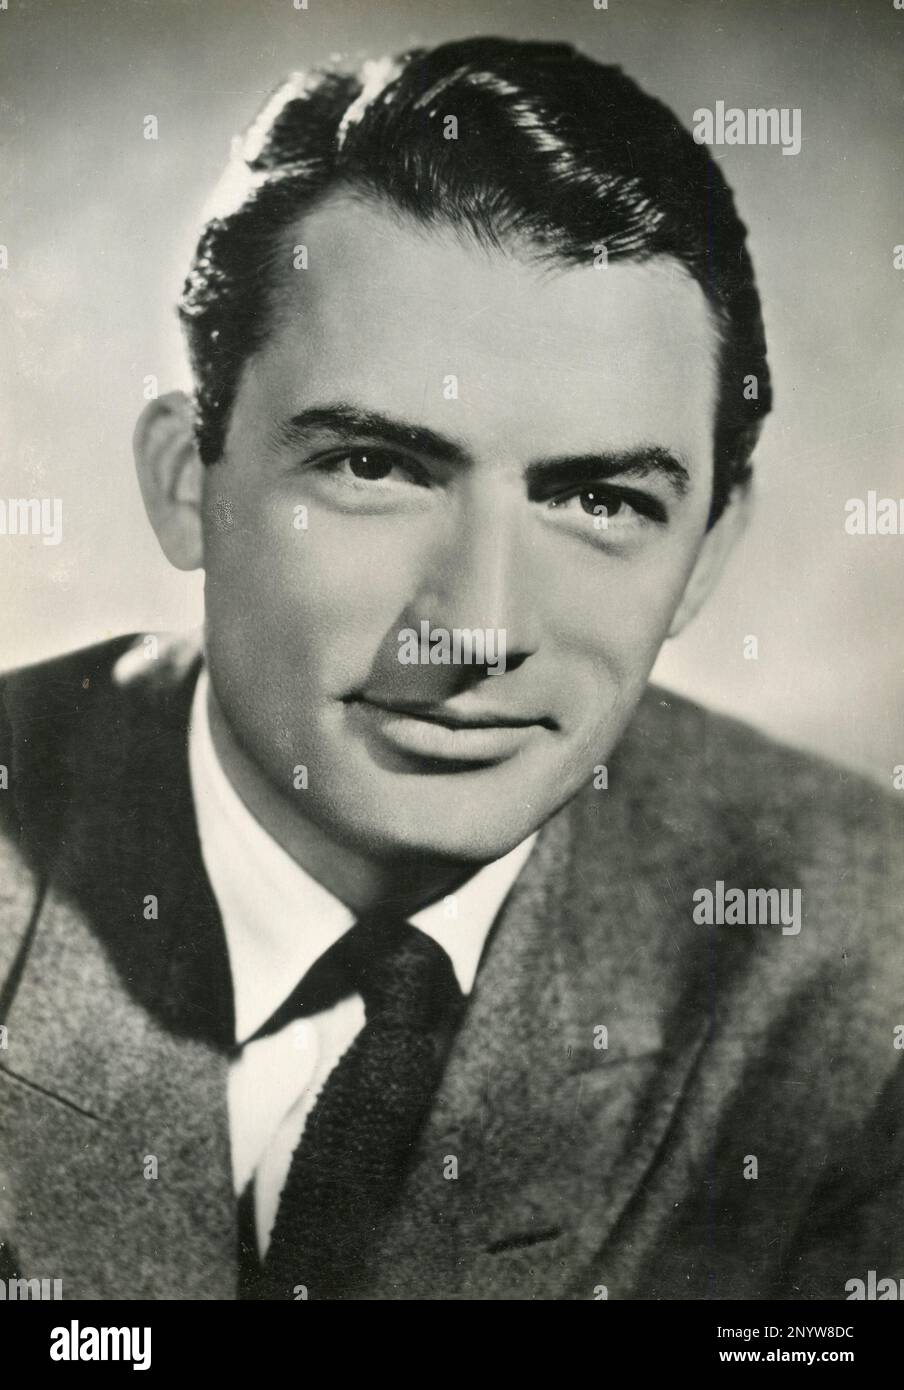 American actor Gregory Peck, USA 1950s Stock Photo